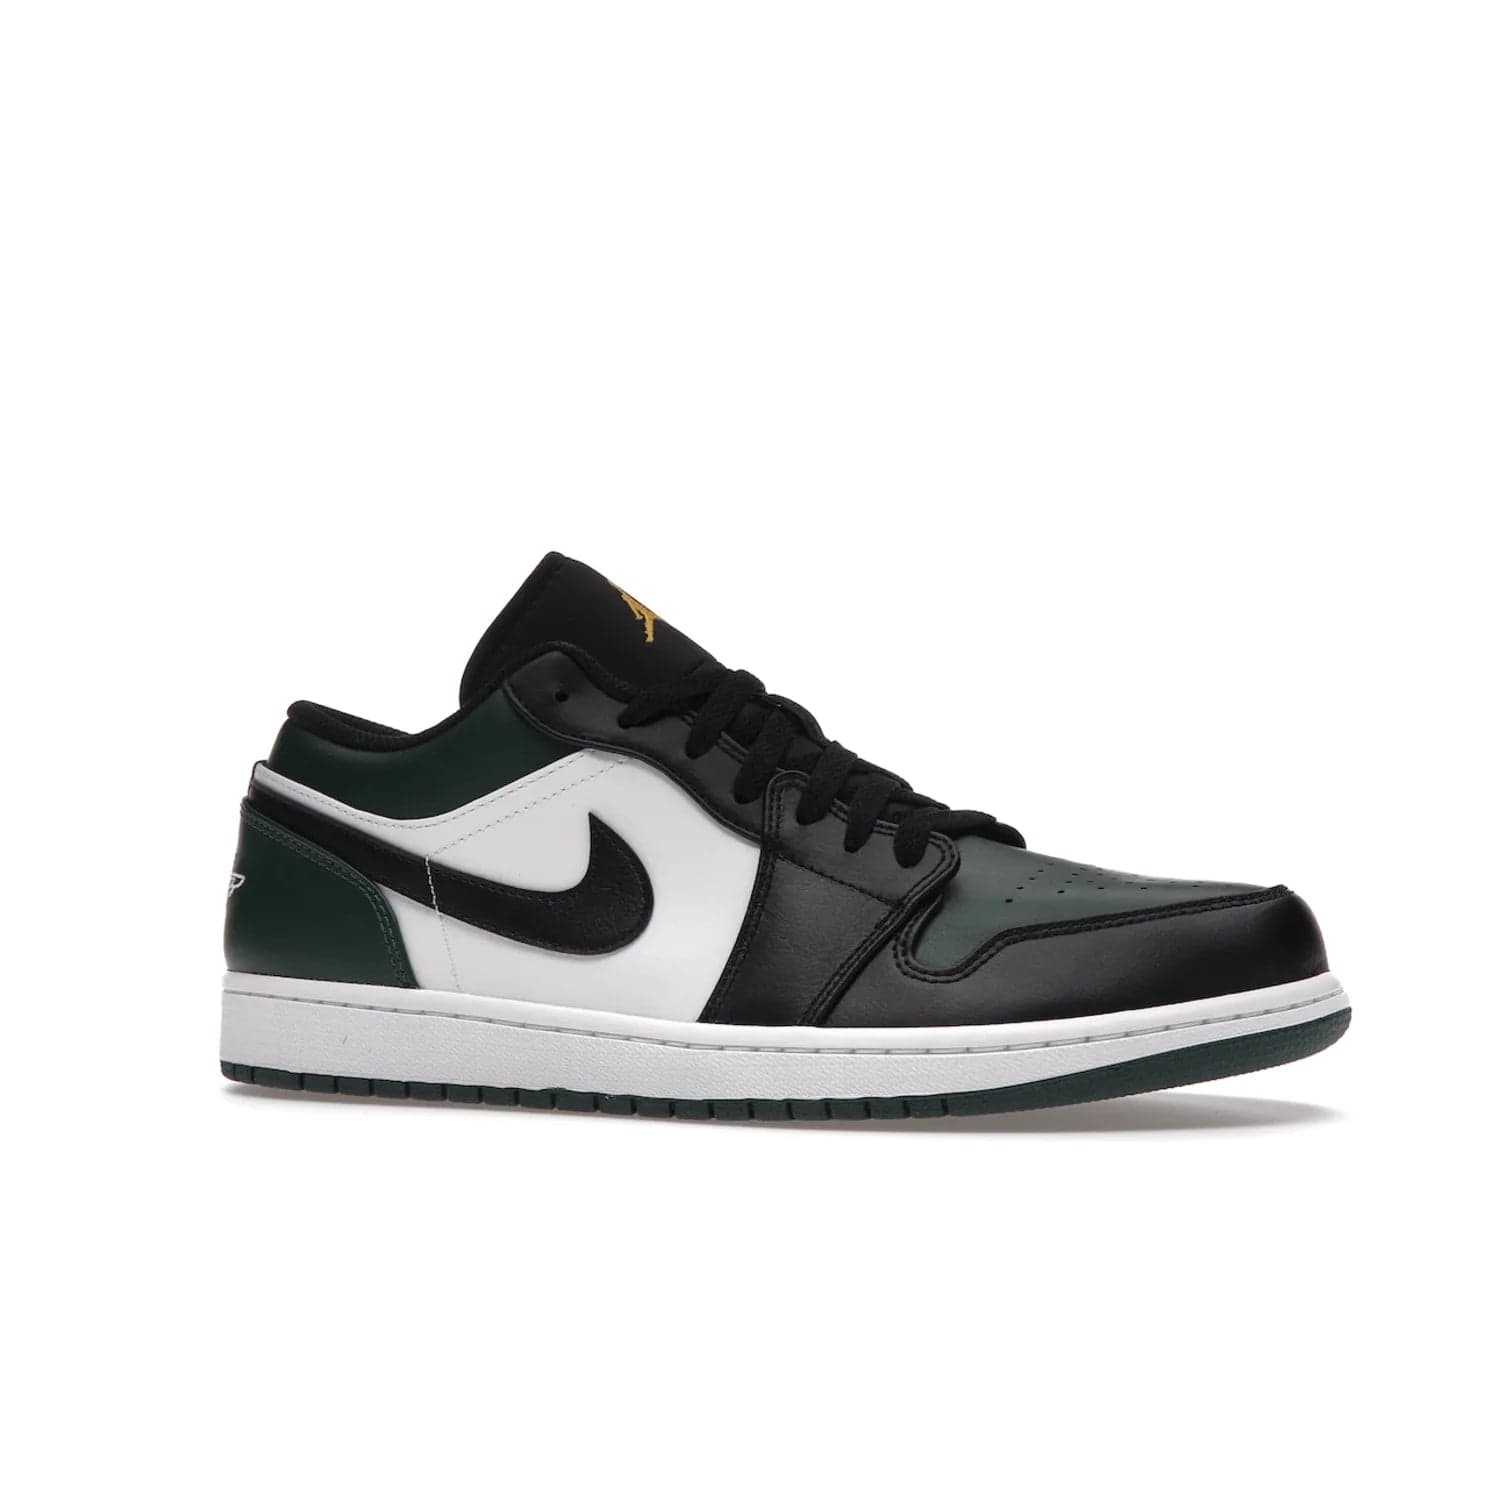 Jordan 1 Low Green Toe - Image 3 - Only at www.BallersClubKickz.com - The Jordan 1 Low Green Toe features white, black and Noble Green leather with black Swoosh. Get the classic Bred Toe-inspired color blocking with green perforated toe box. White and green Air sole completes the design. Released in October 2021 at only $100. Grab your pair now!